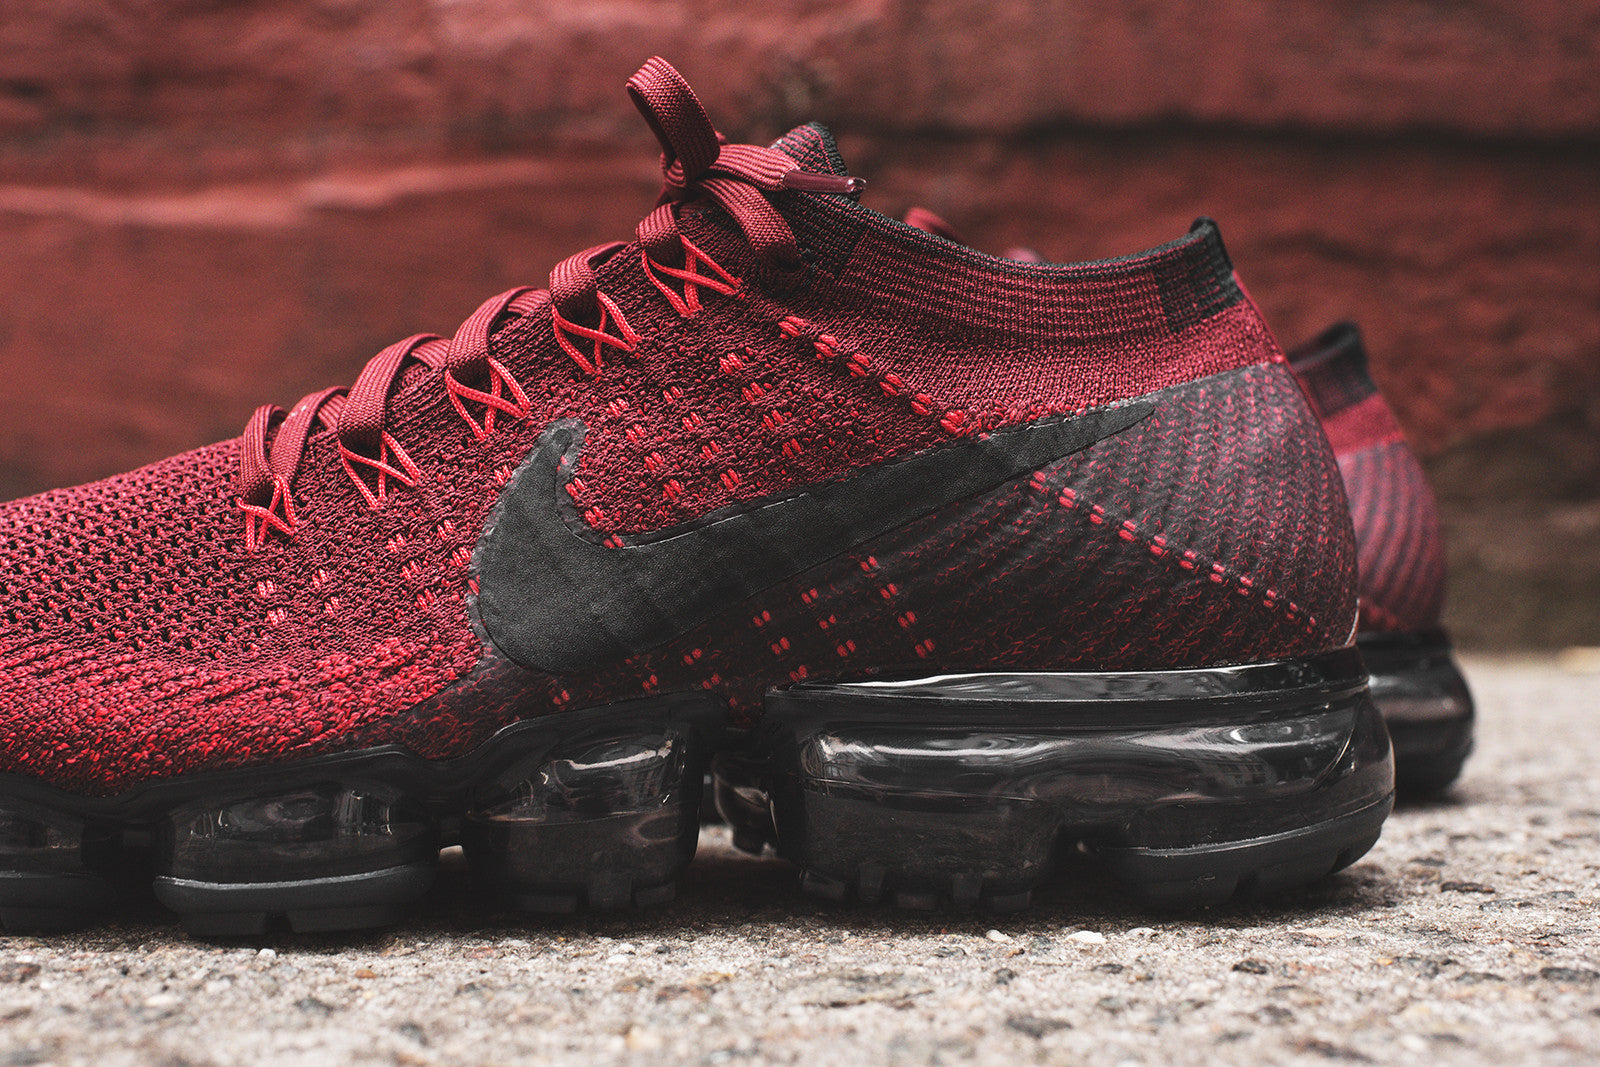 red nike air vapormax flyknit